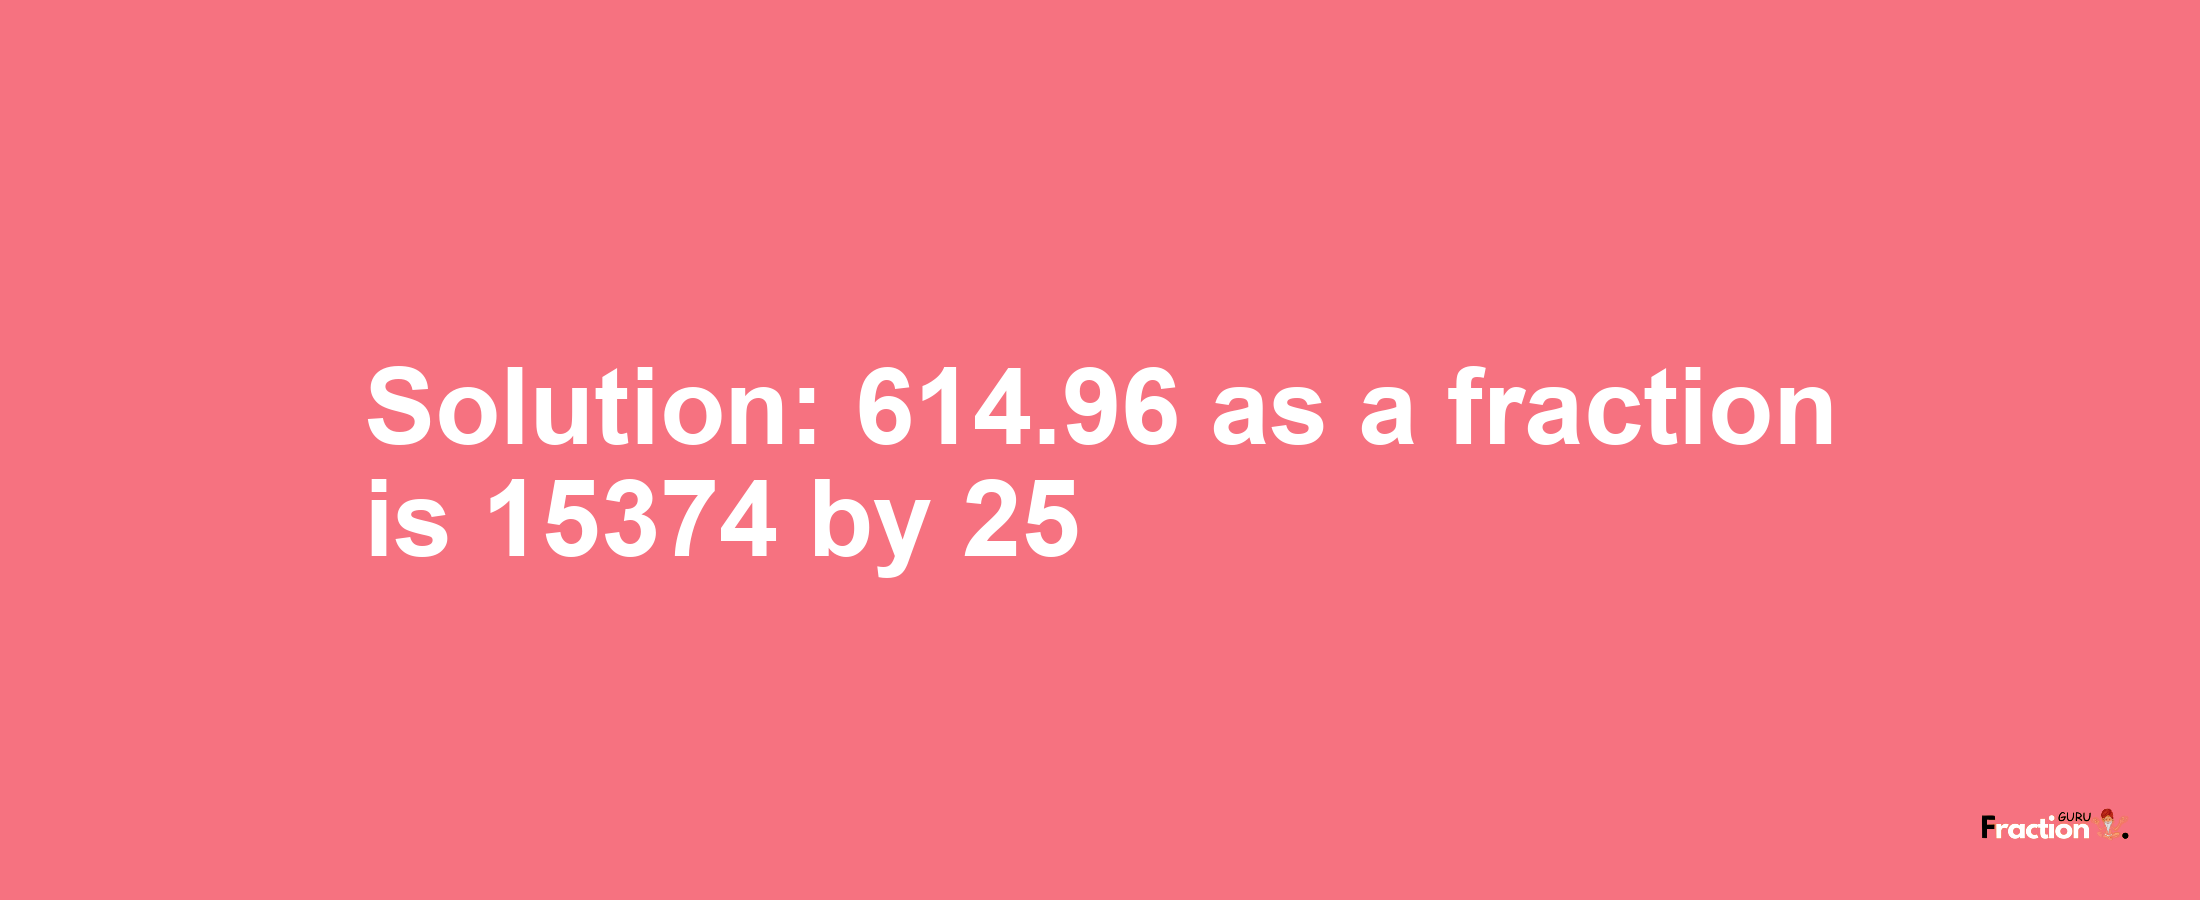 Solution:614.96 as a fraction is 15374/25